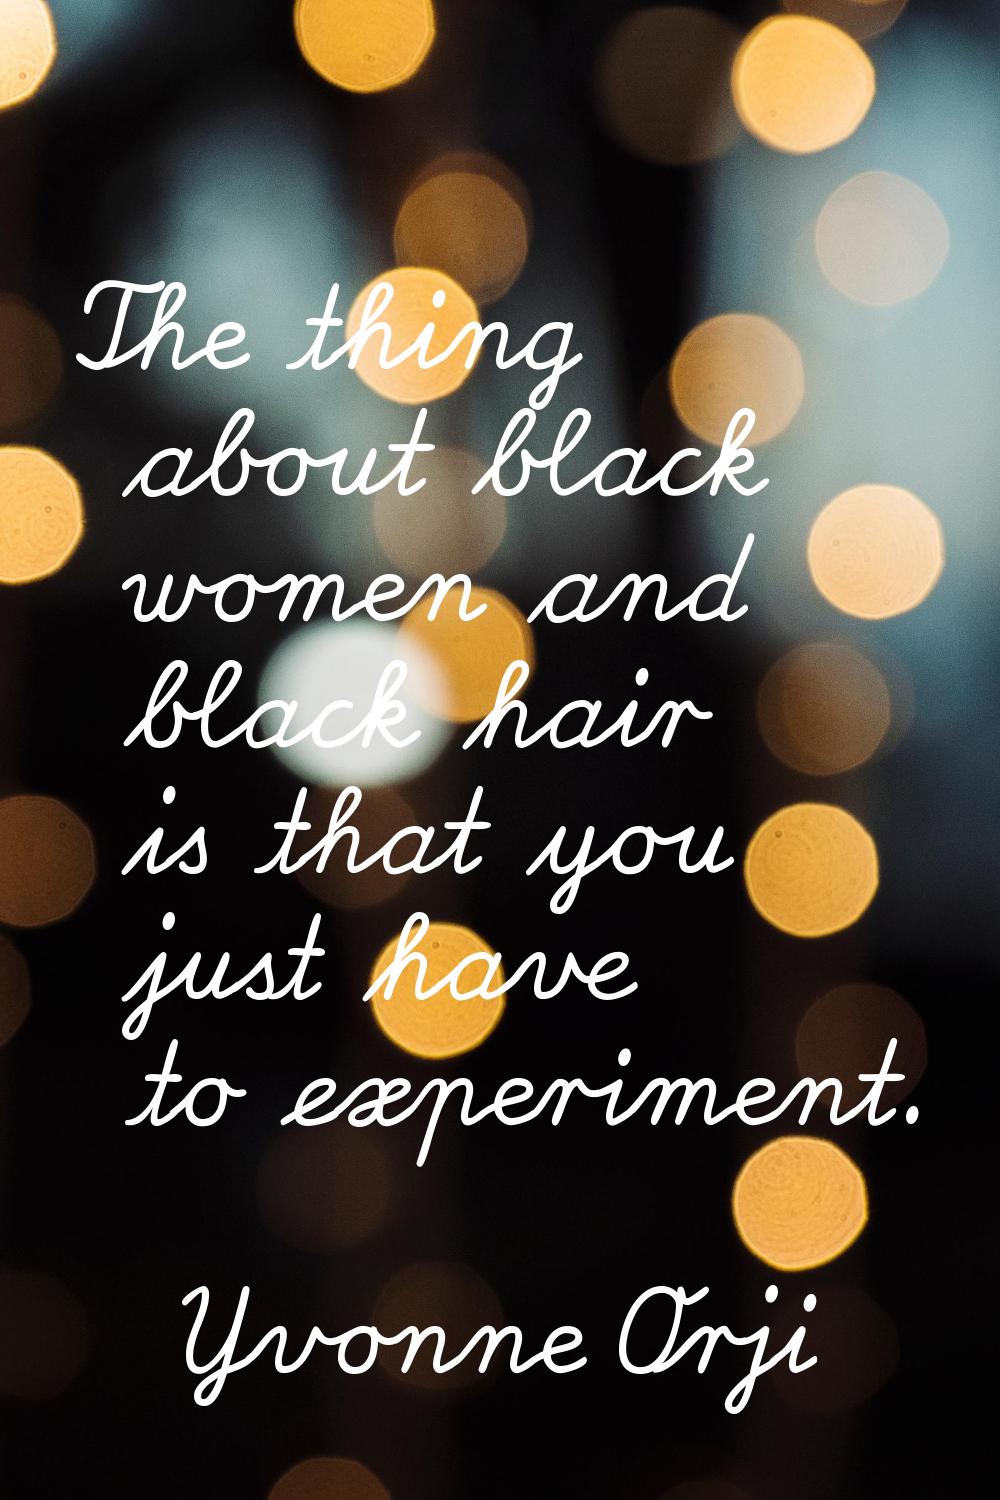 The thing about black women and black hair is that you just have to experiment.